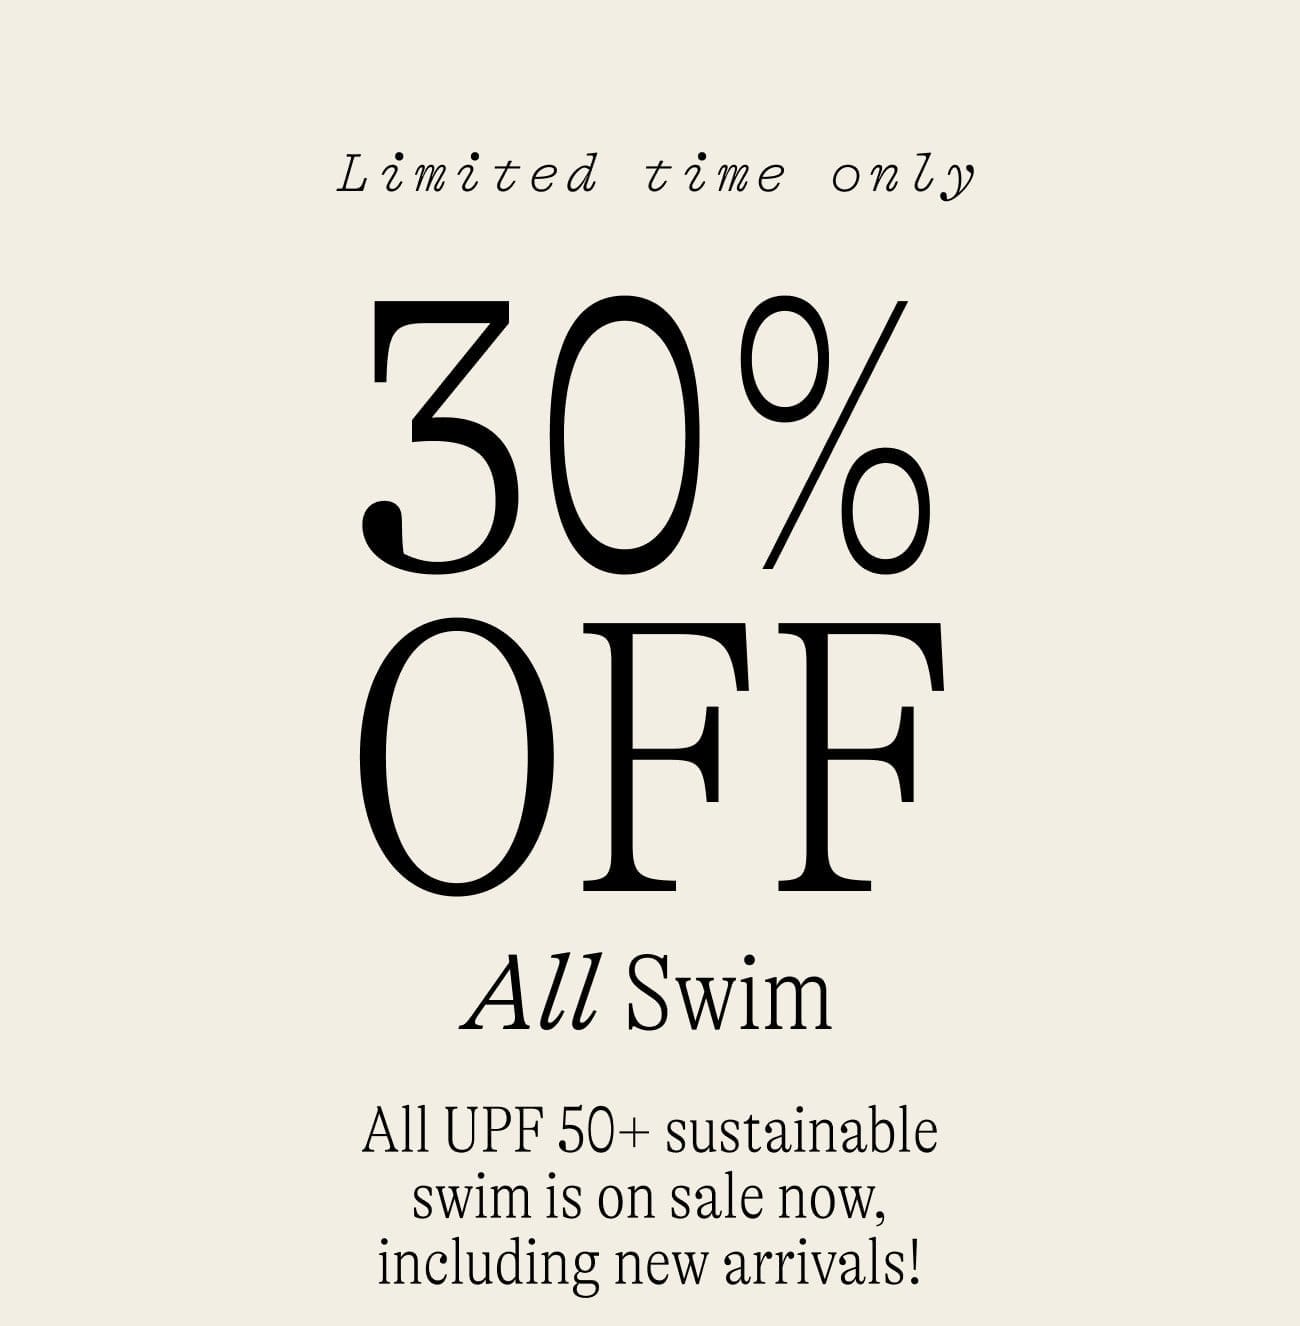 Limited time only 30% OFF ALL SWIM! All UPF 50+ sustainable swim is on sale now, including new arrivals!